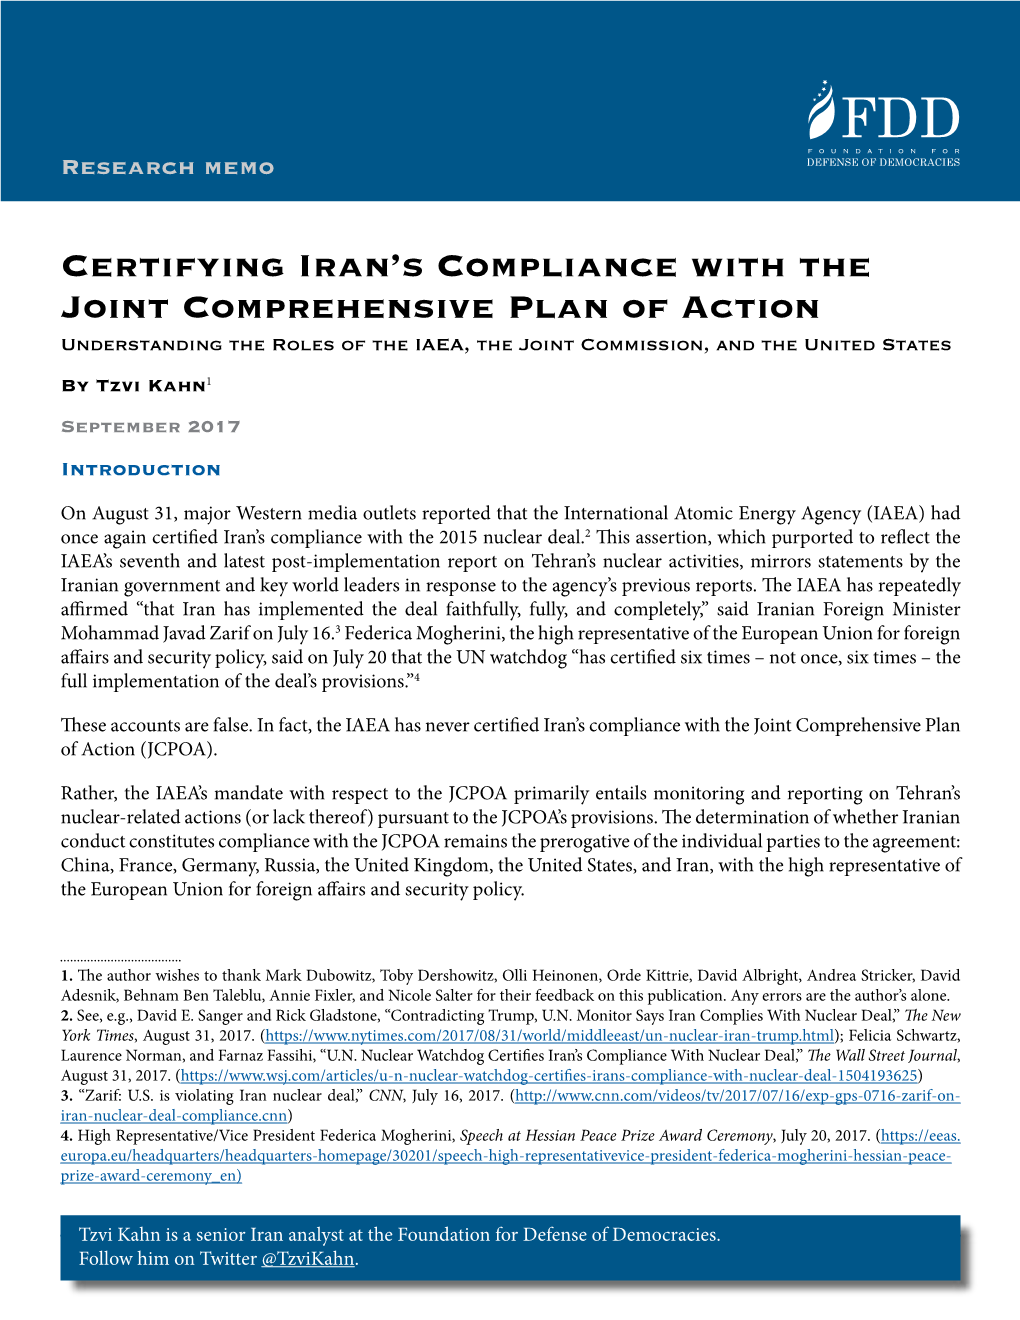 Certifying Iran's Compliance with the Joint Comprehensive Plan of Action